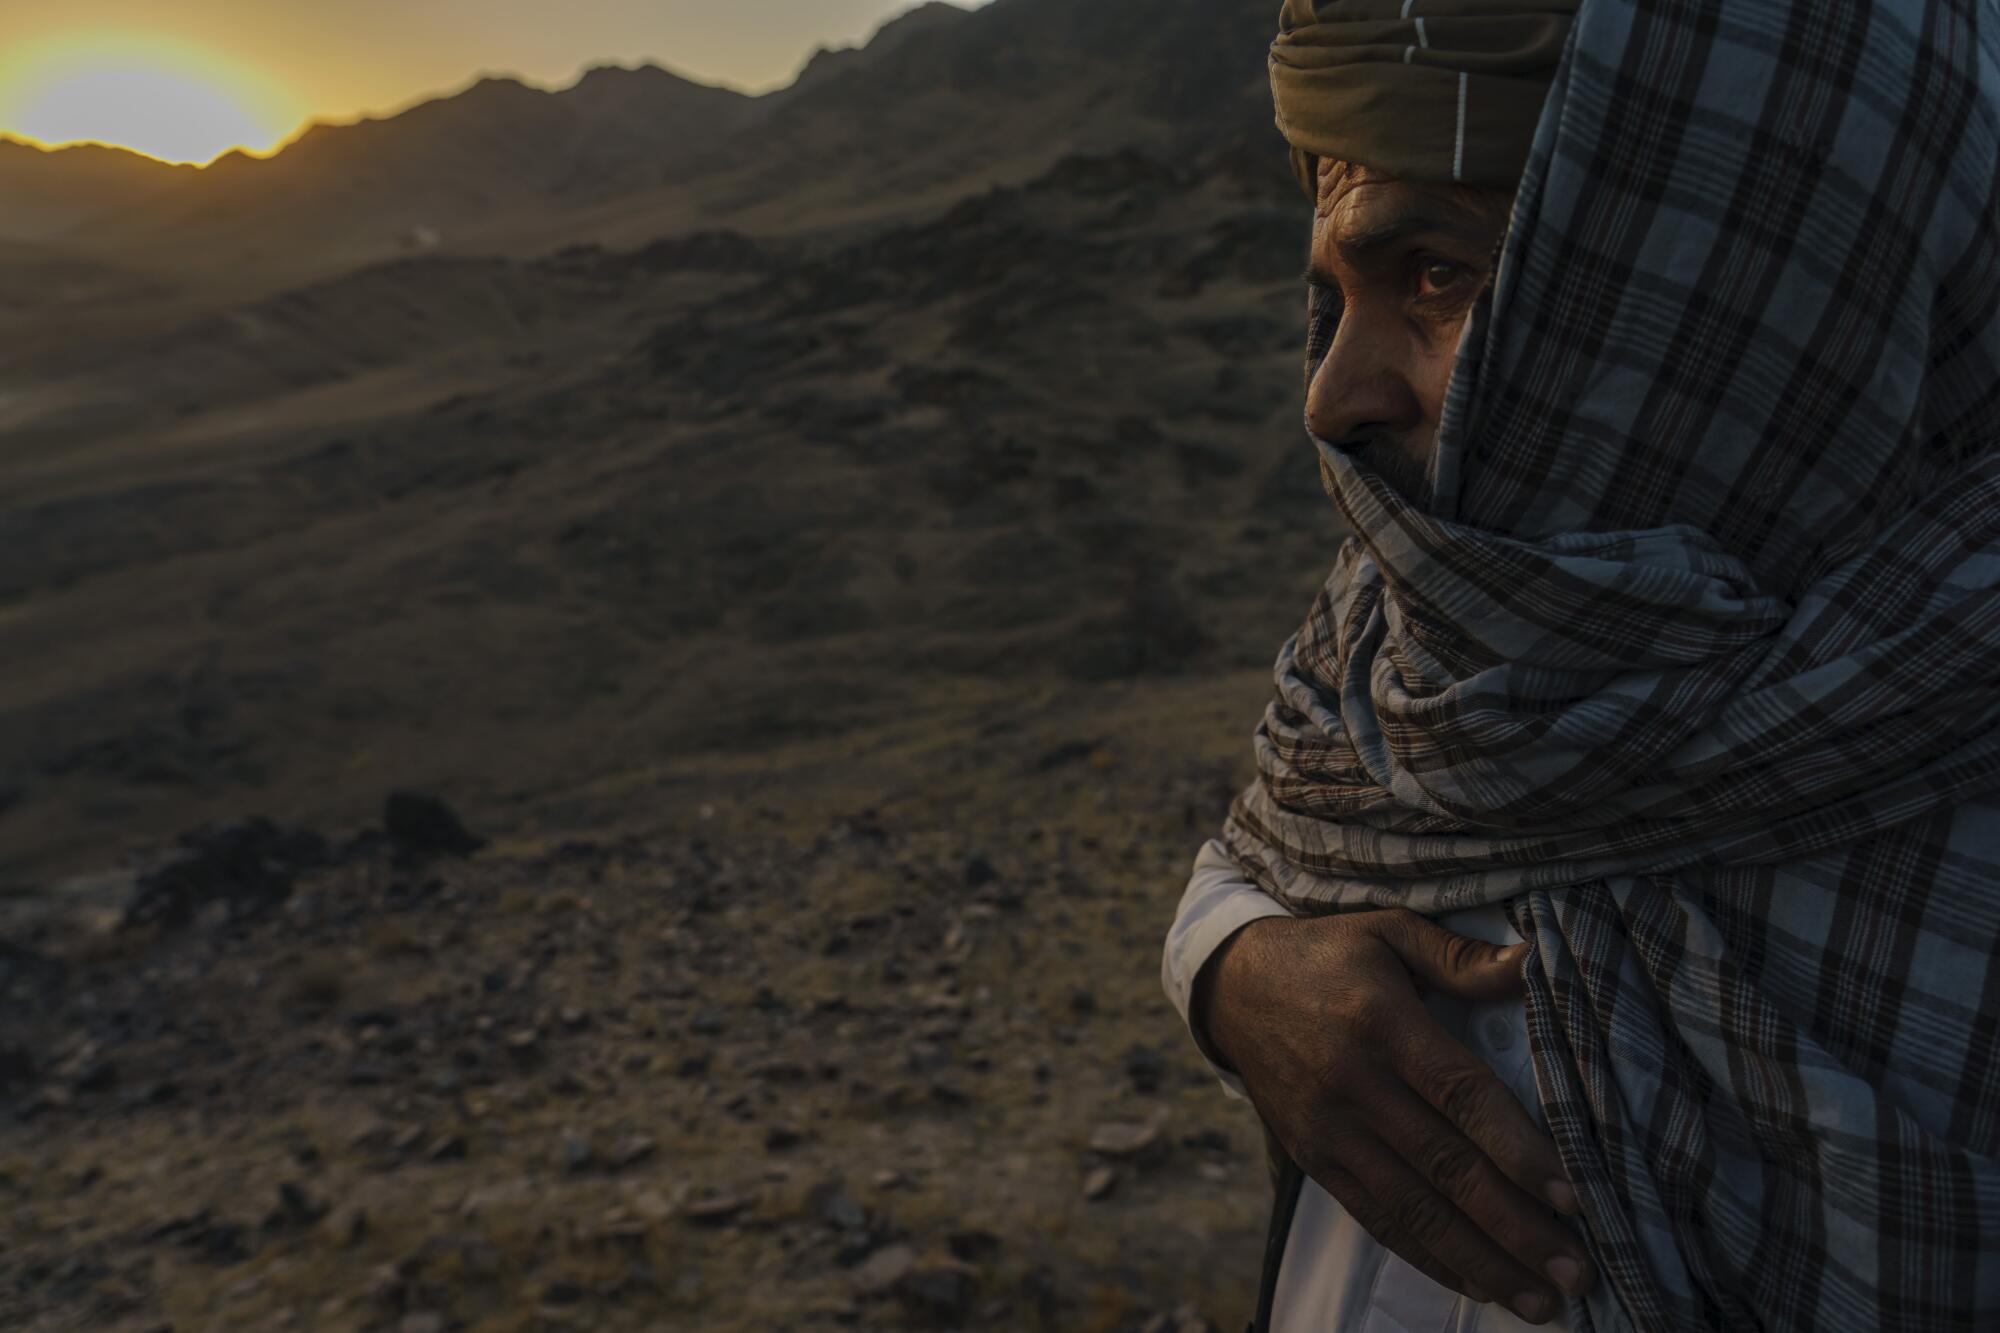 A Taliban commander looks over mountains.